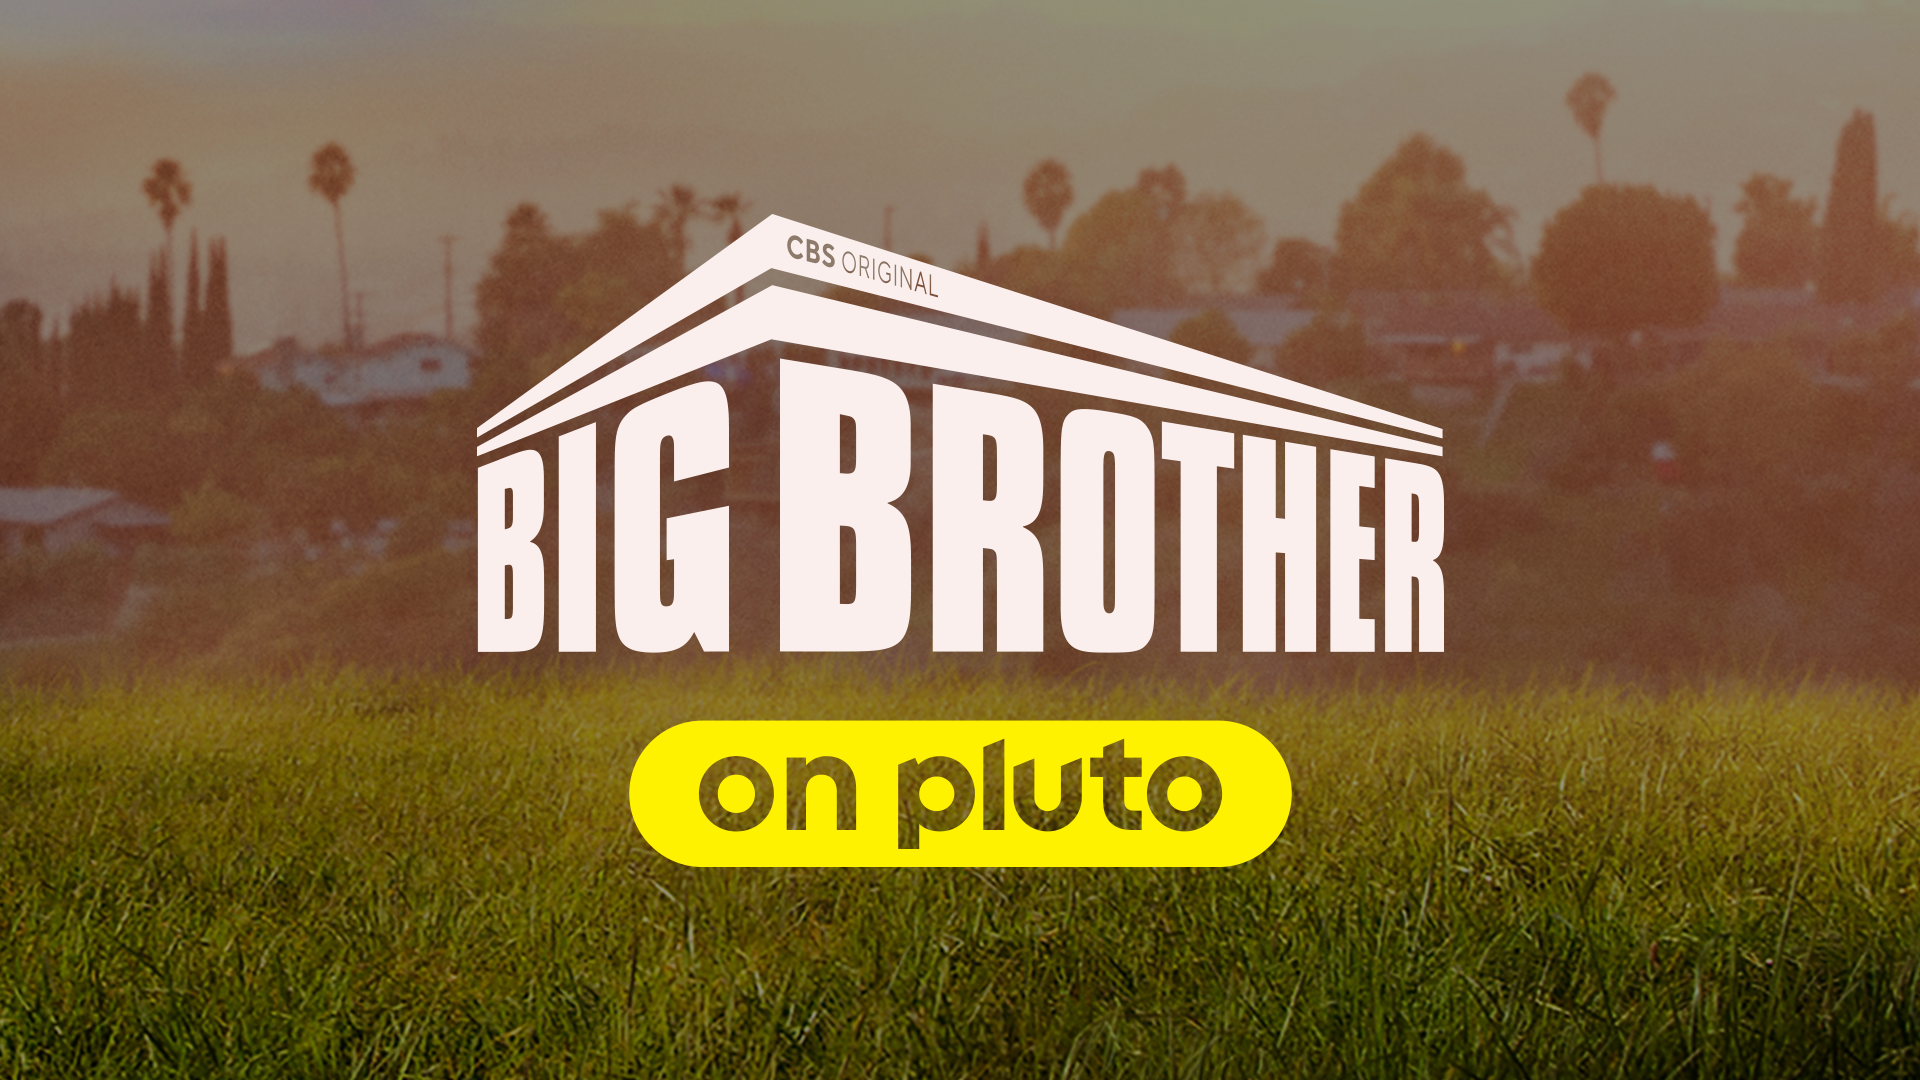 Pluto TV is Adding 5 New 24/7 Channels Dedicated to Big Brother